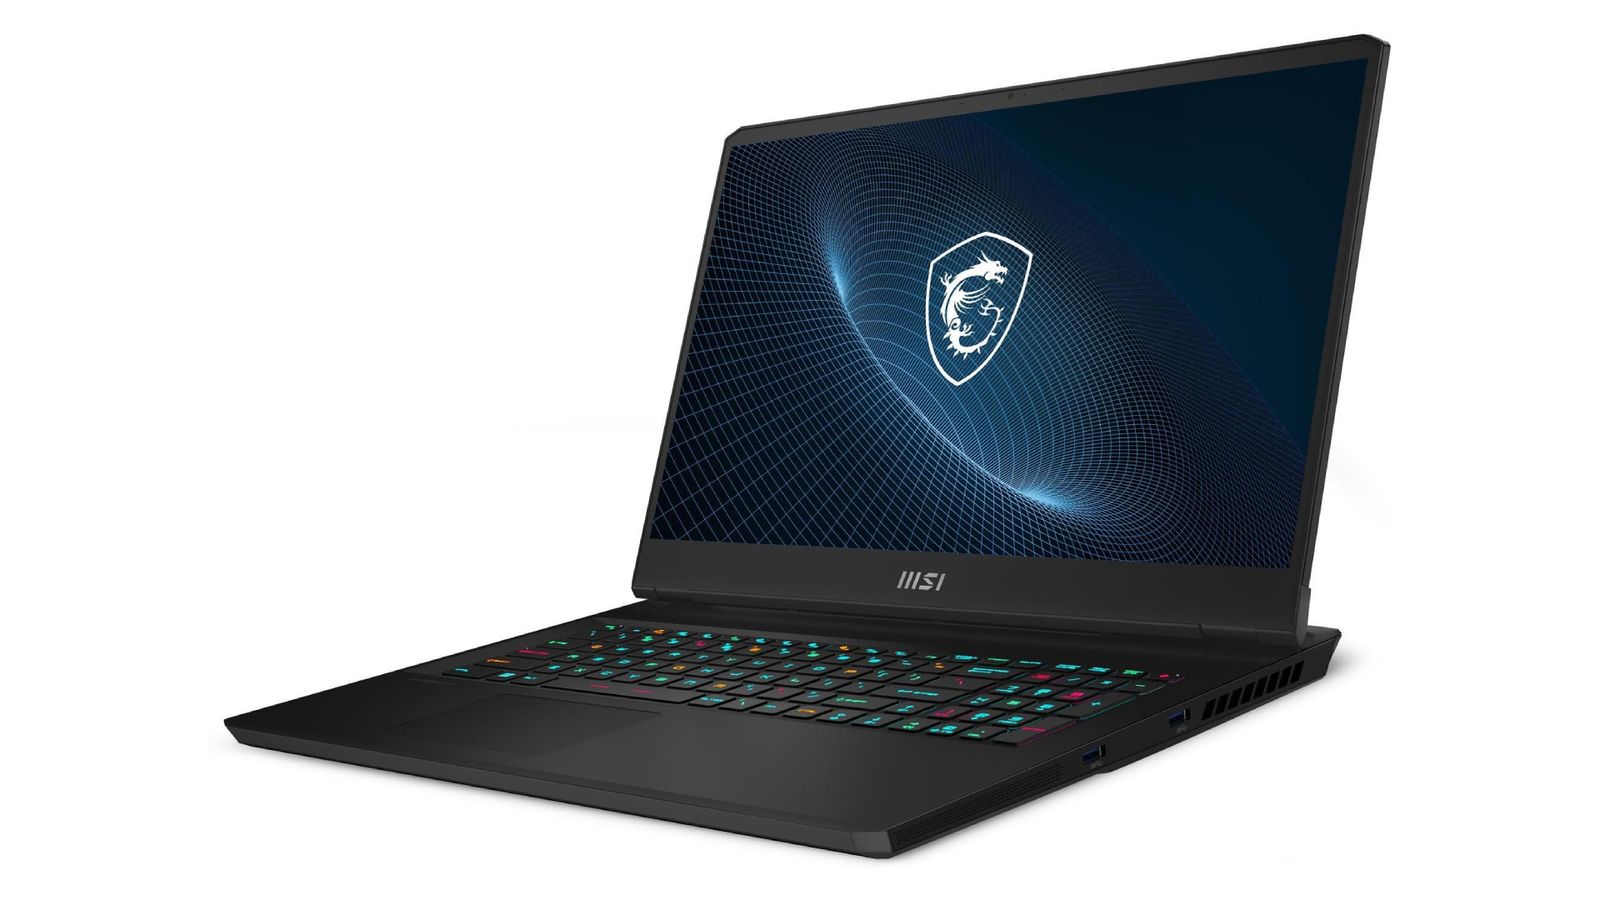 MSI Vector GP76 product image of a black laptop featuring blue, red, and orange backlit keys and MSI branding in white on a blue background on the display.